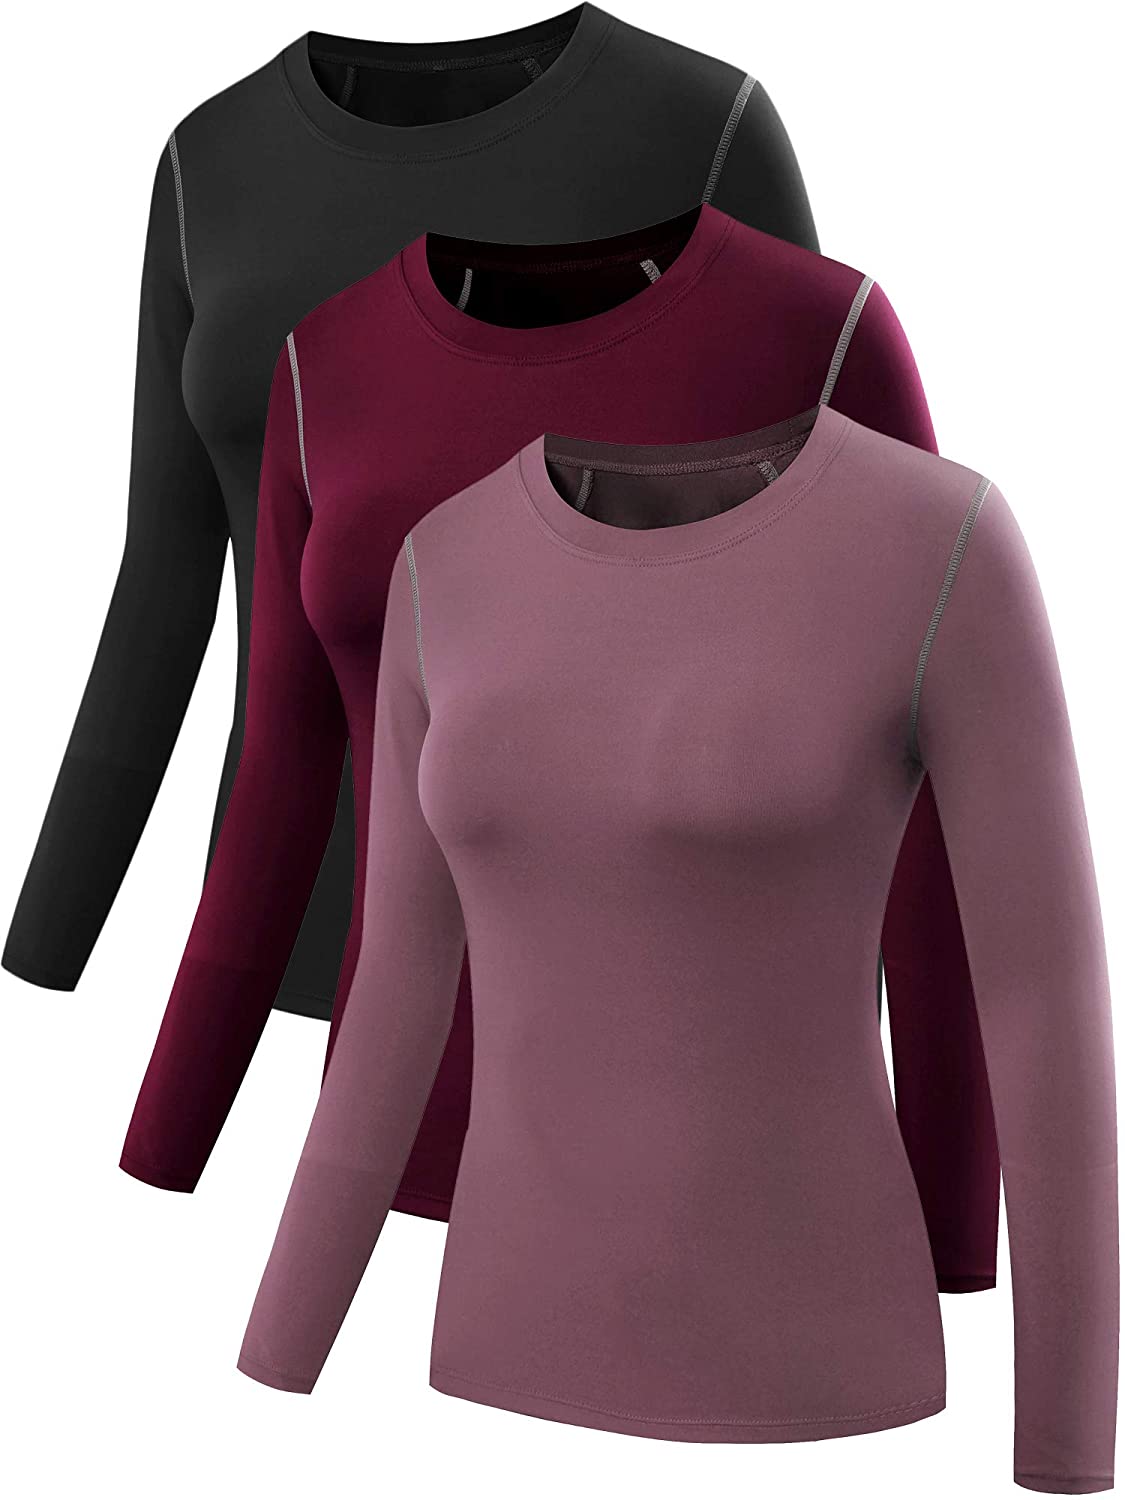 NELEUS Womens 3 Pack Dry Fit Athletic Compression Long Sleeve T Shirt